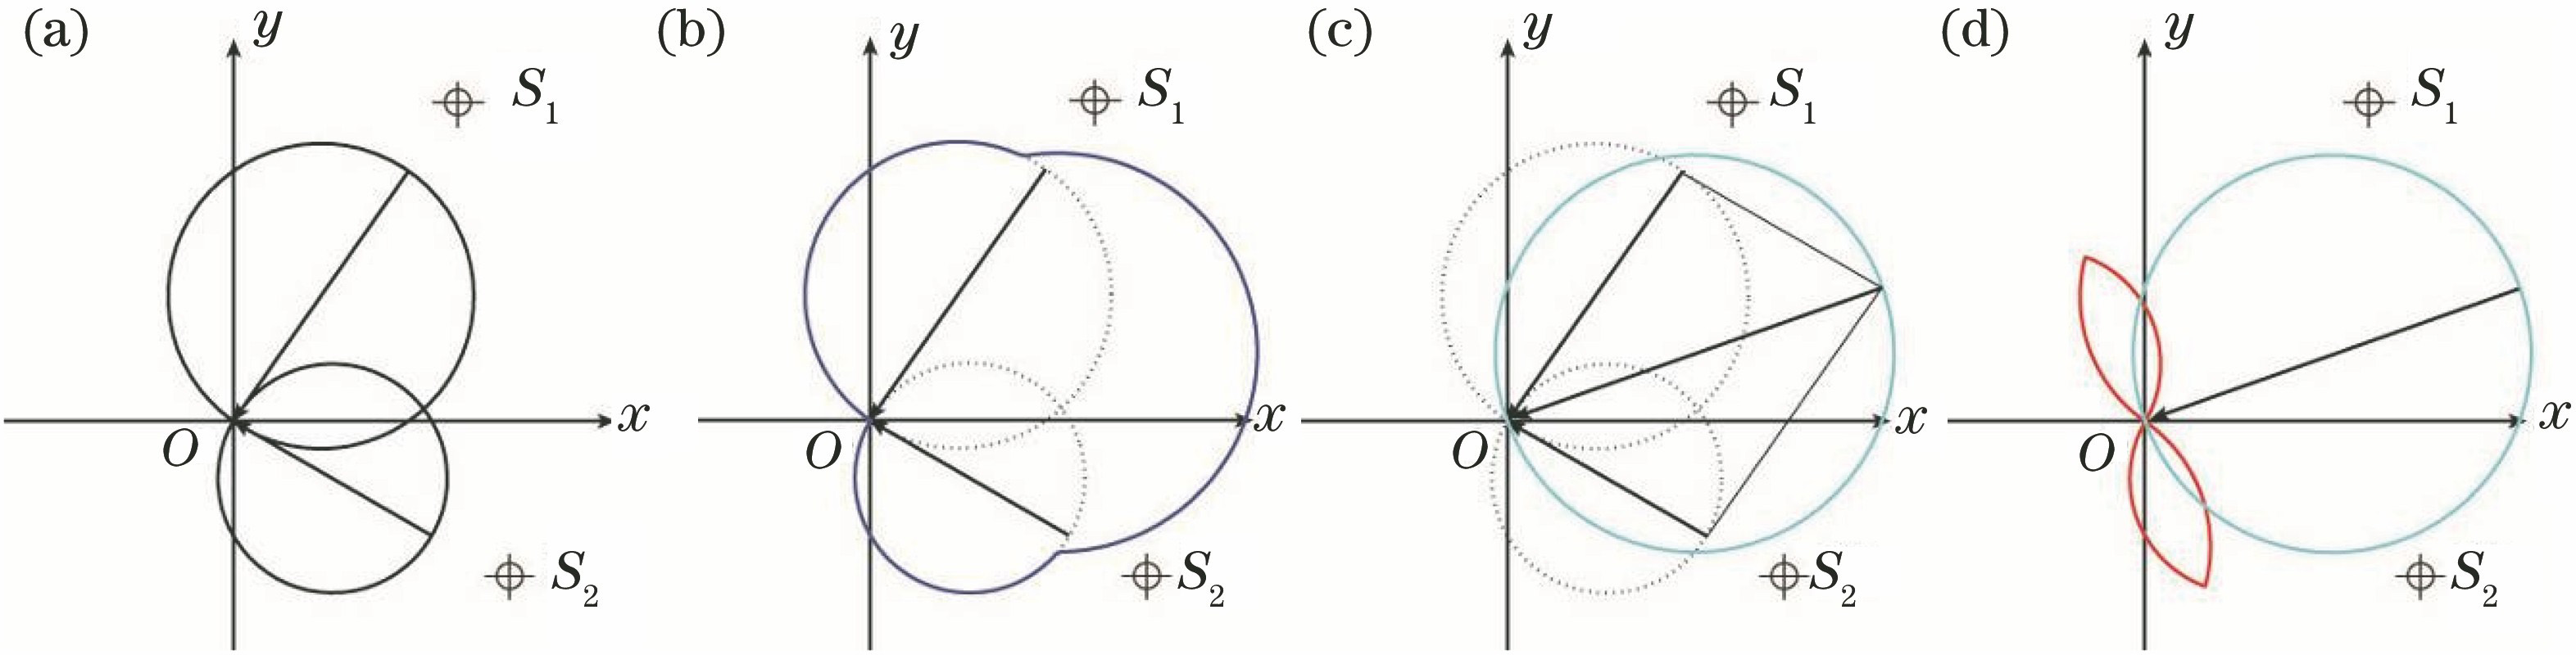 Illuminance distribution models under the combined action of point light sources S1 and S2 in a dark environment. (a) Illuminance distribution models for S1 and S2; (b) dark solid shape illustrates superposed illuminance model distribution due to S1 and S2; (c) light circle shows equivalent illuminance distribution of resultant vector component; (d) dark shape illustrates symmetric component of illumination distribution model